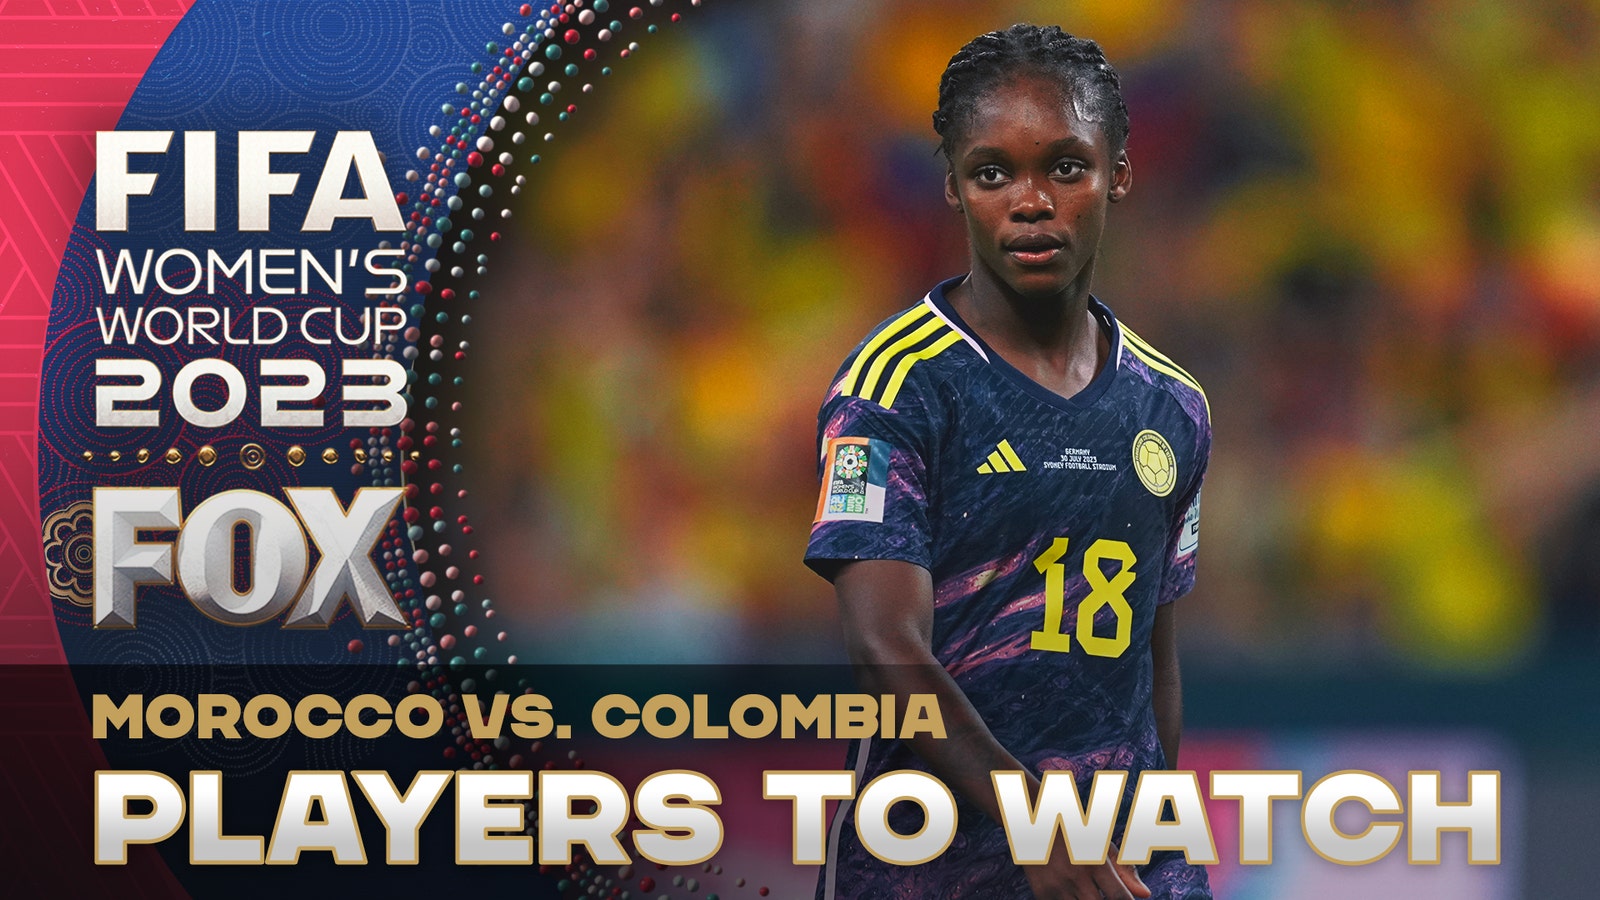 Linda Caicedo leads players to watch for Morocco vs. Colombia 